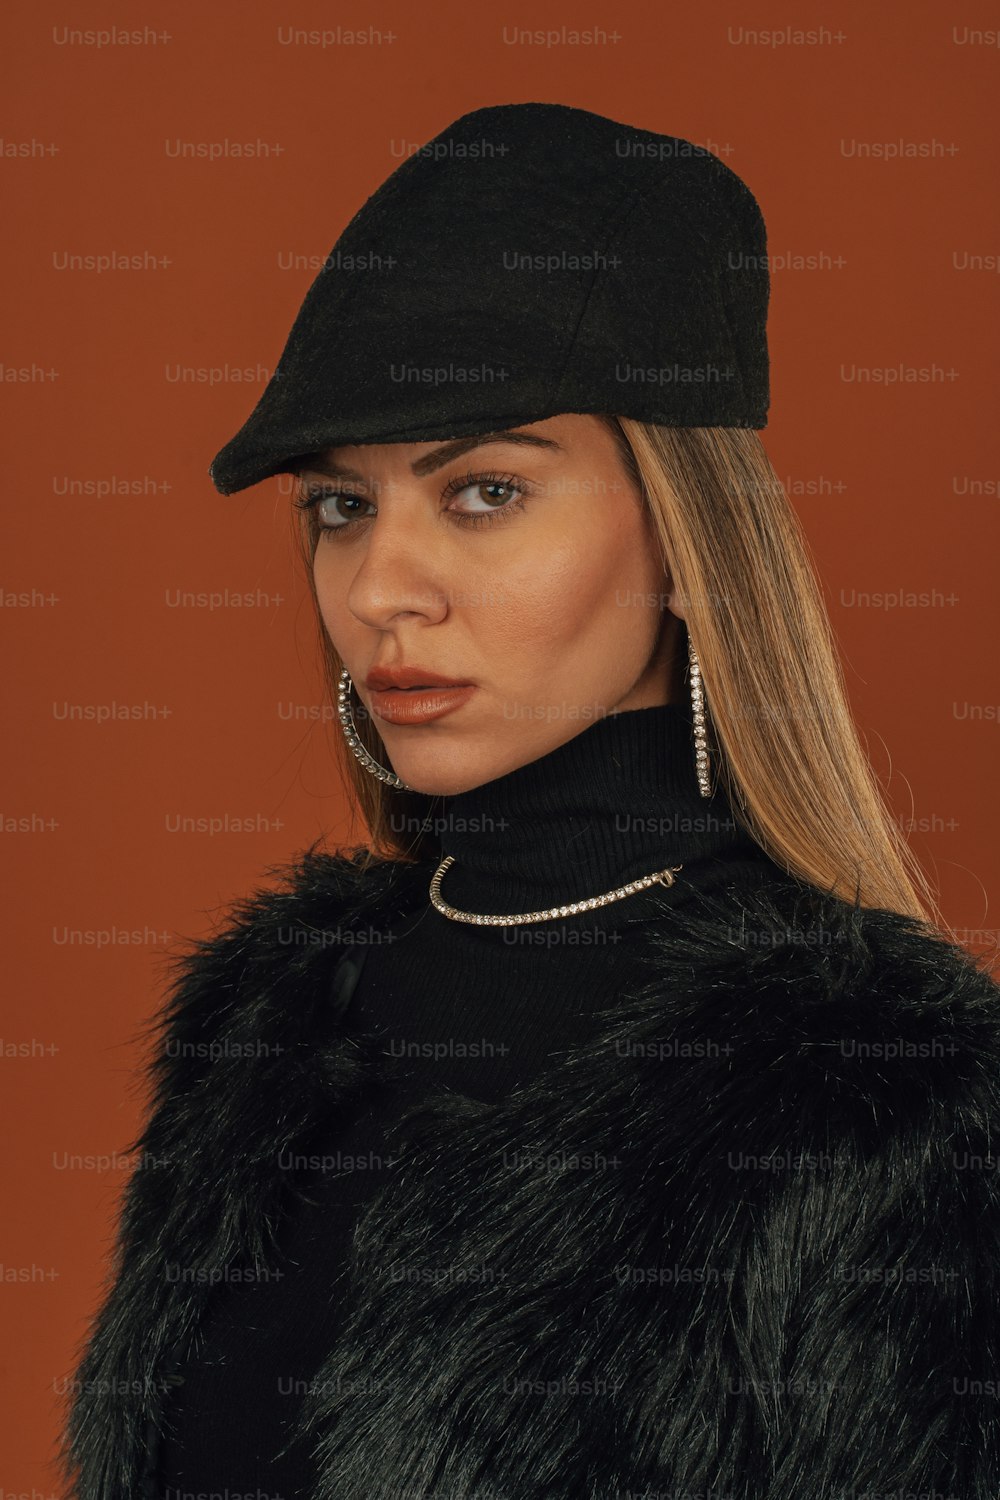 a woman wearing a black hat and fur coat